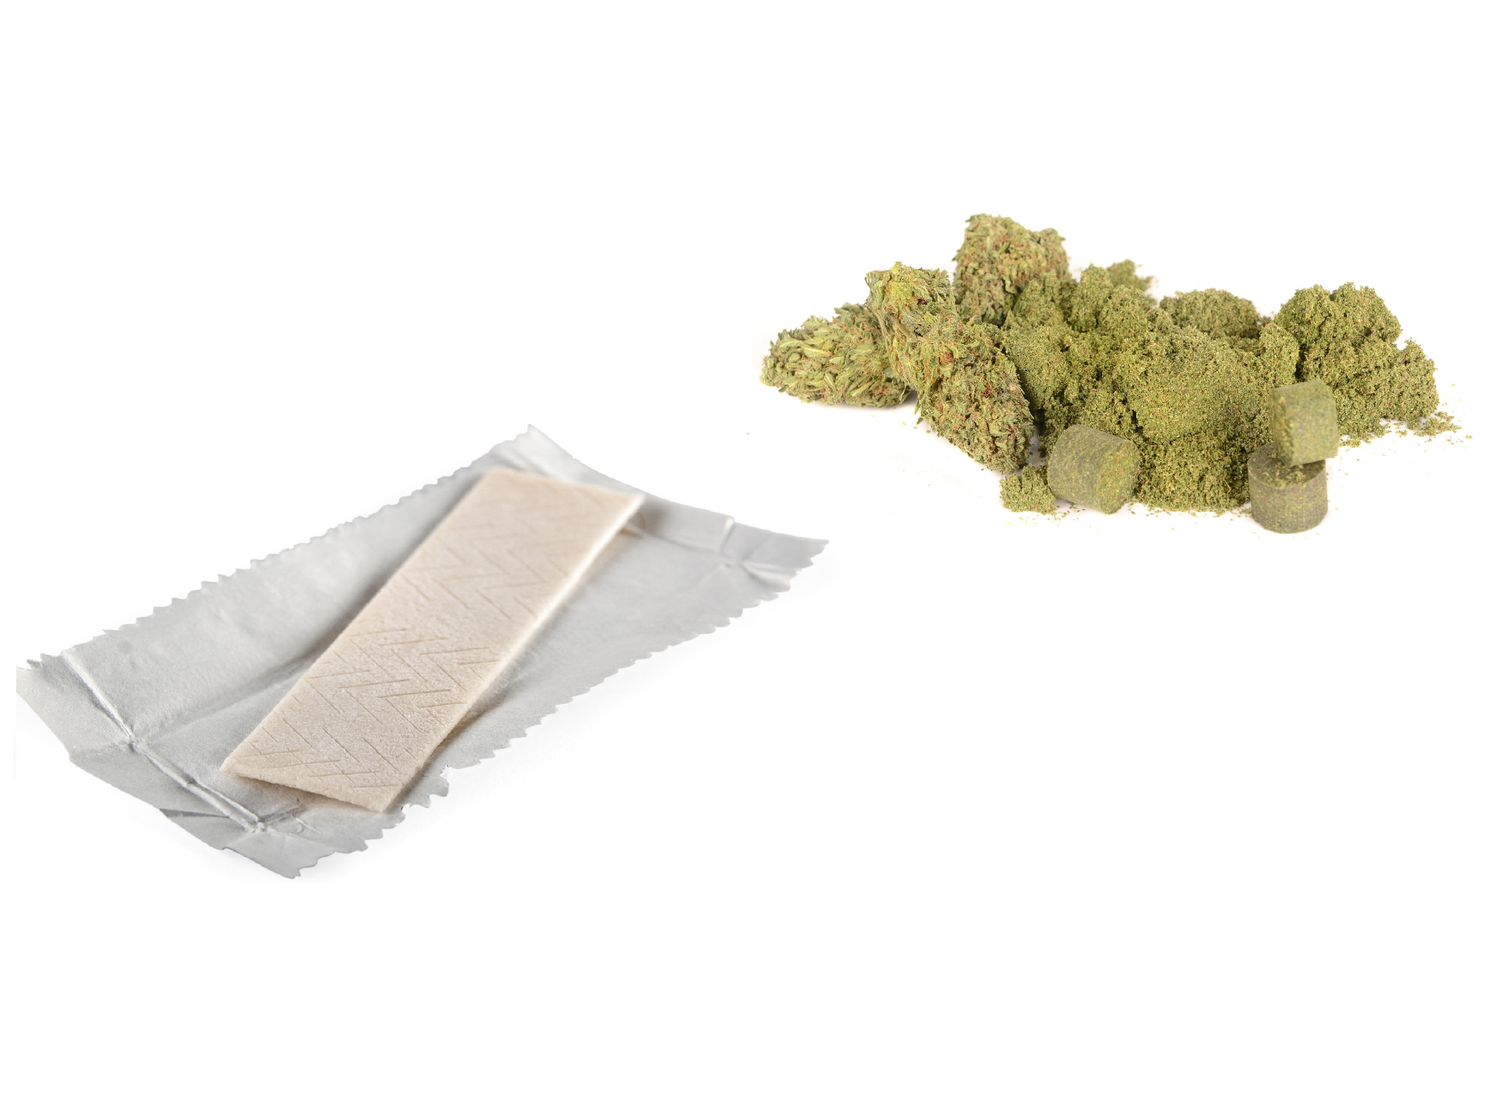 What You Can Use as Substitute for Rolling Papers